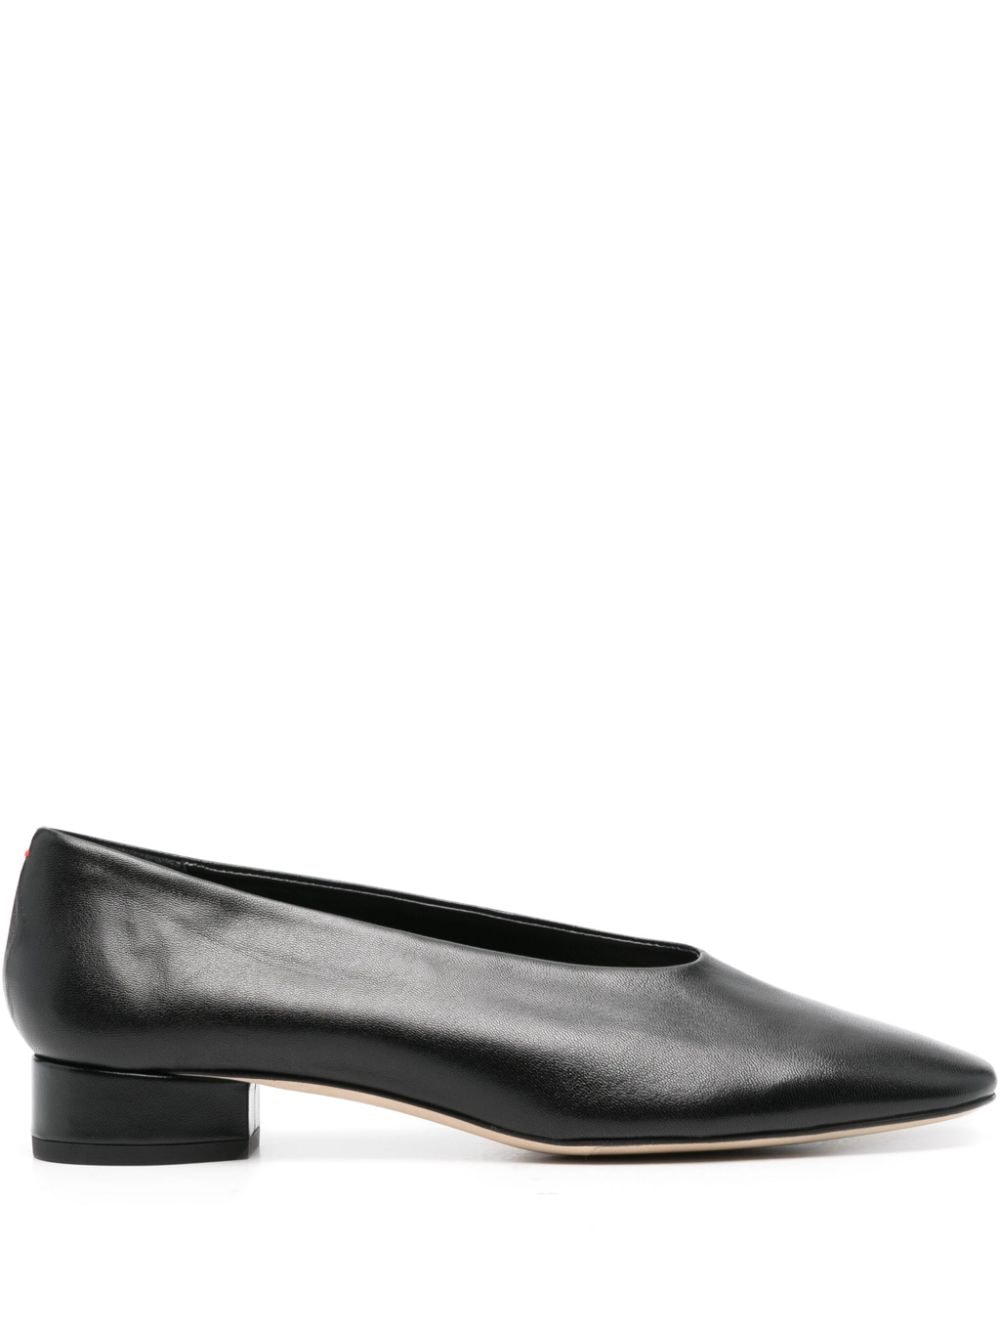 Aeyde Delia 25mm Leather Pumps In Black